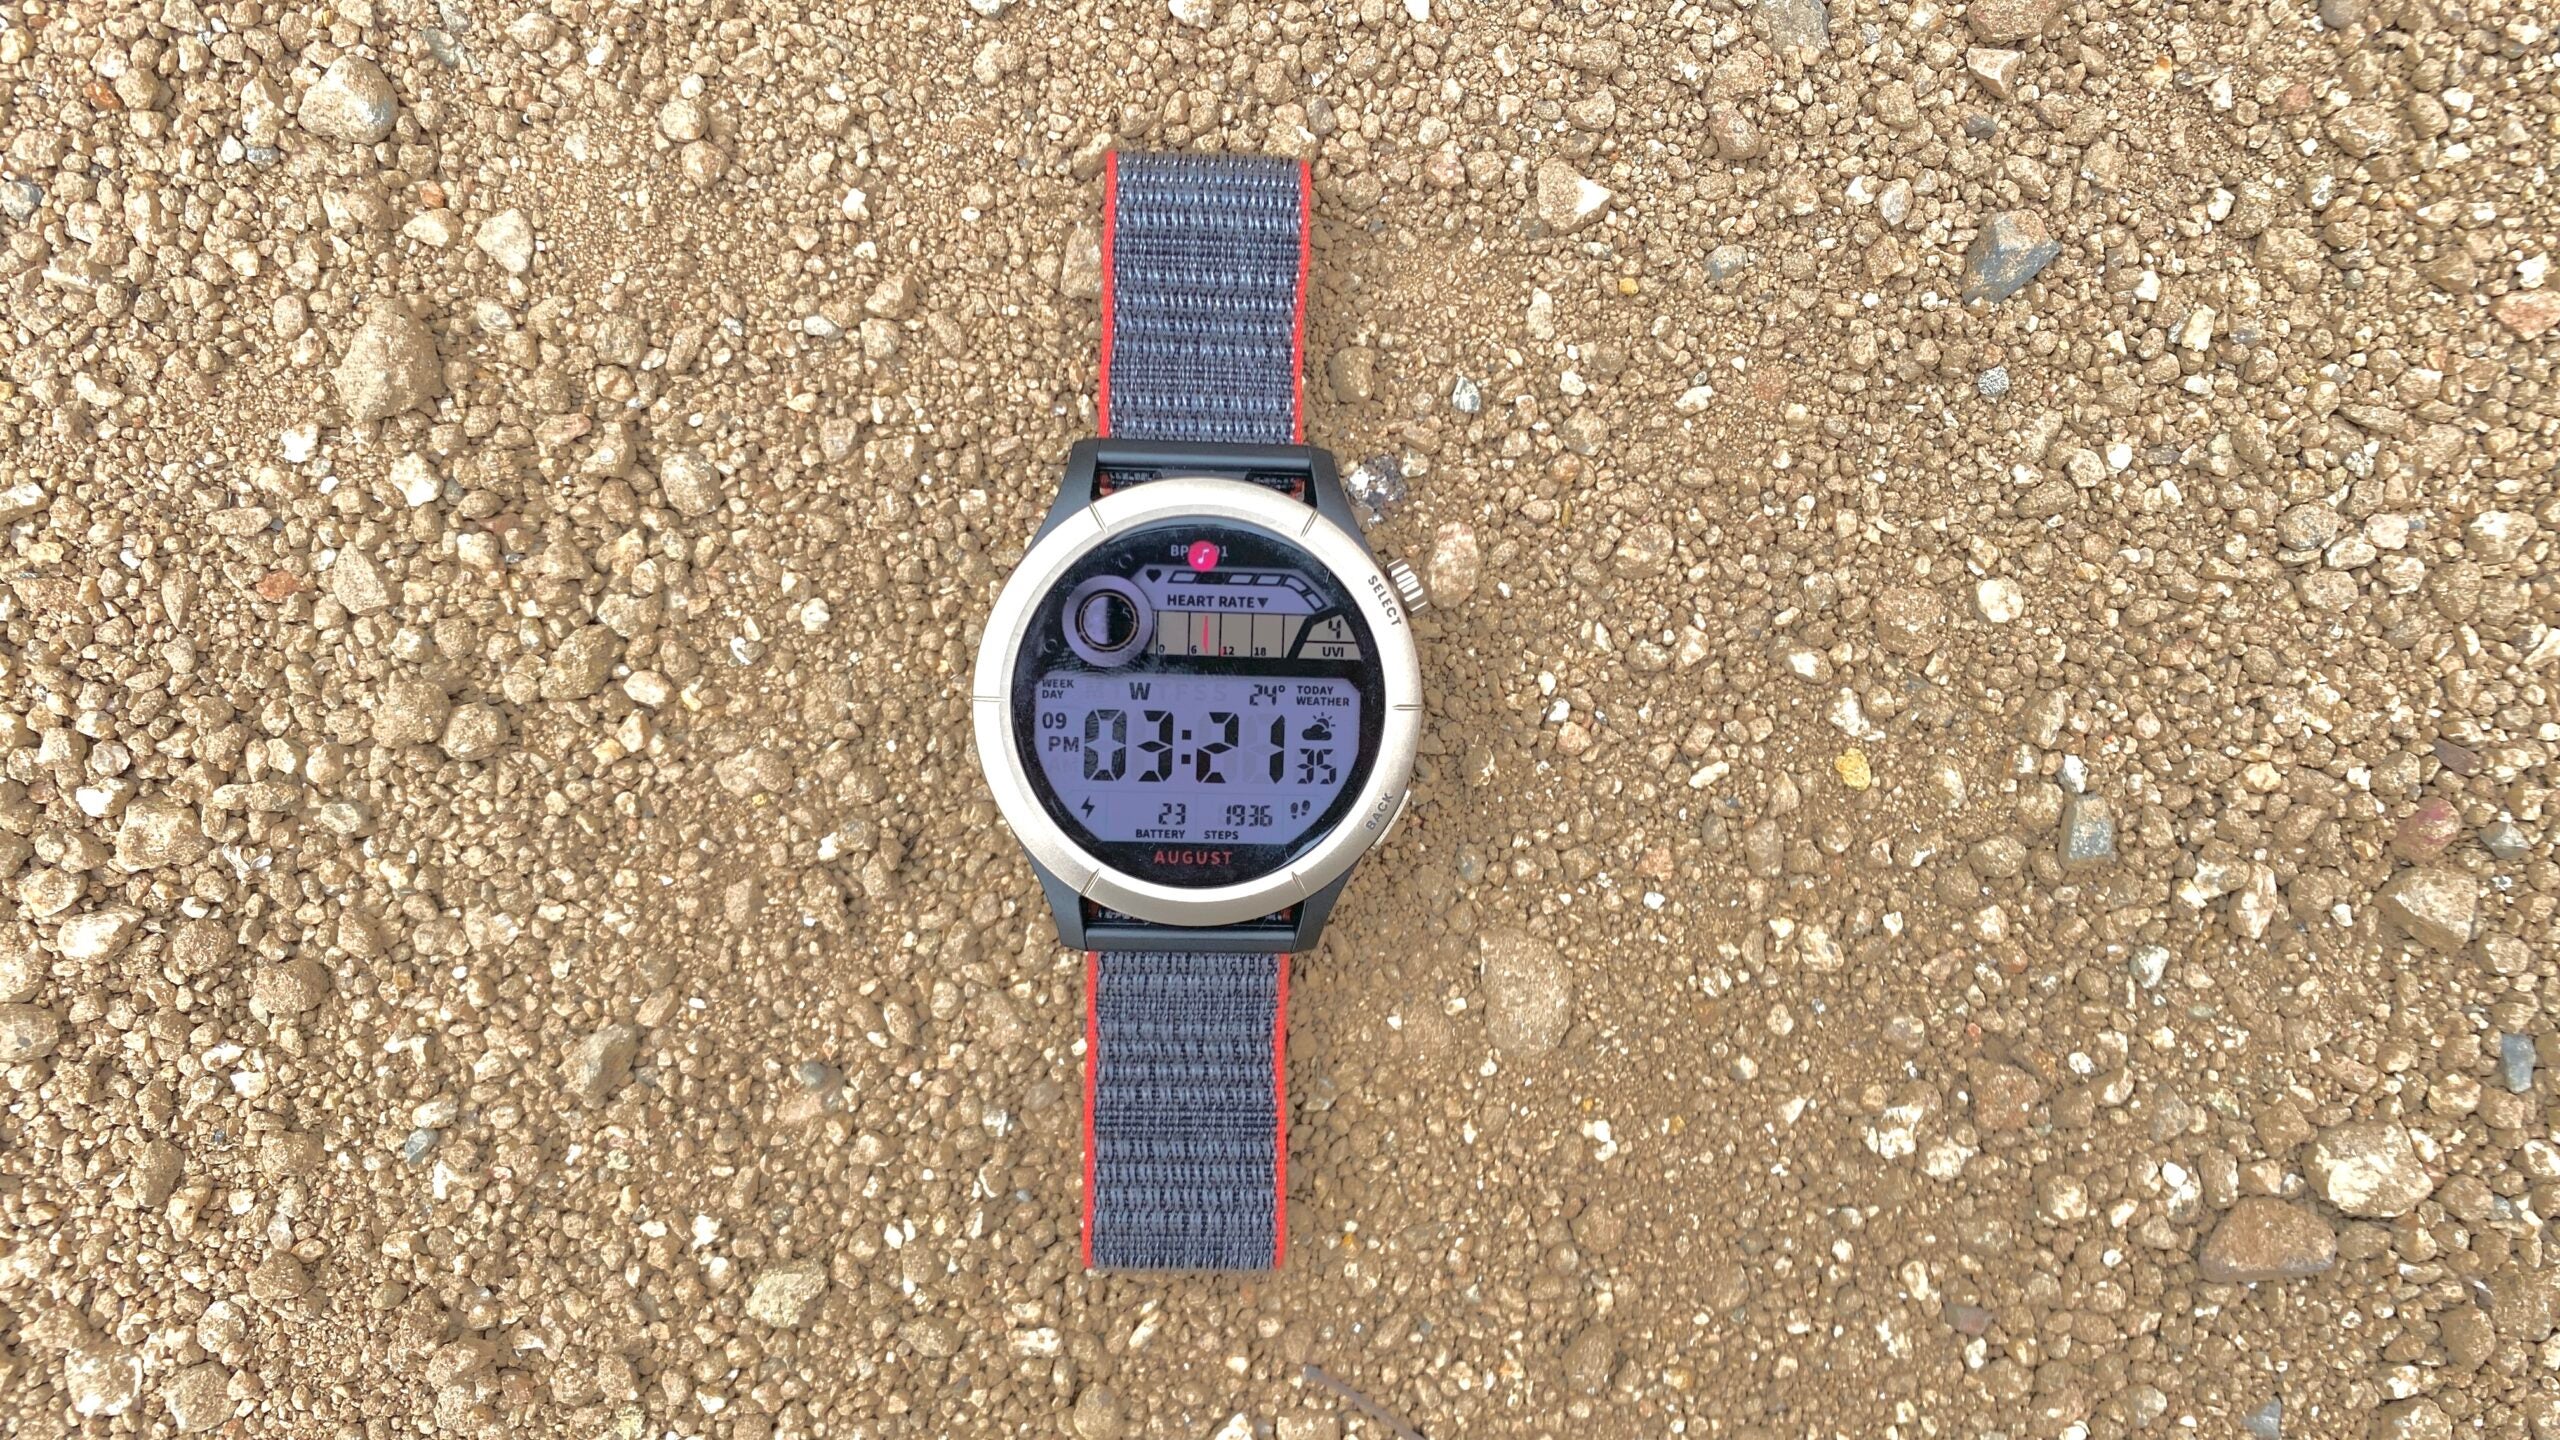 Amazfit Cheetah Square, review and details